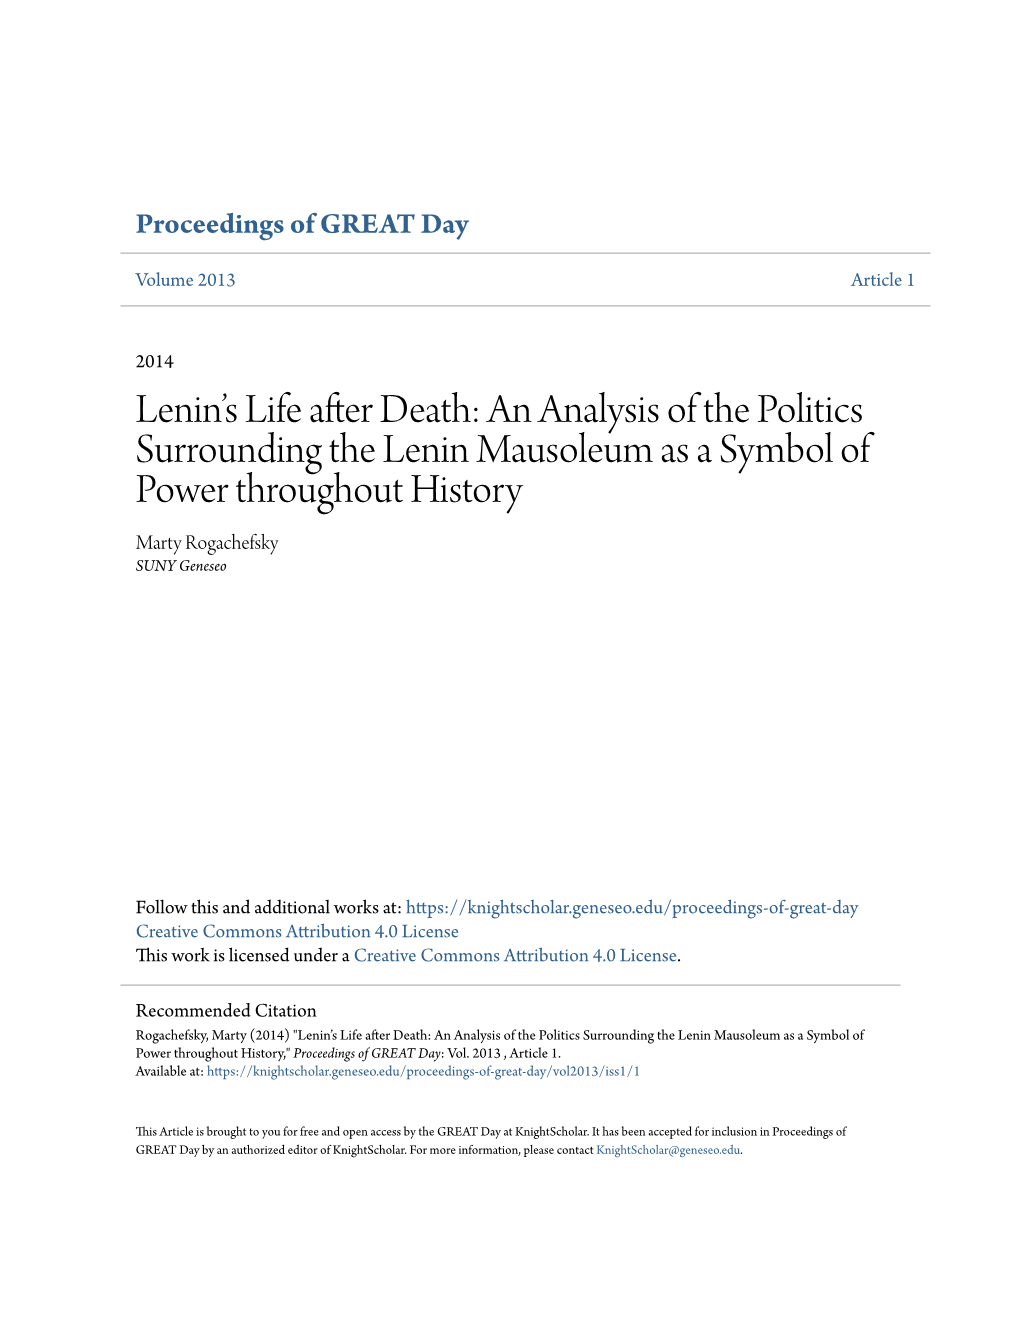 An Analysis of the Politics Surrounding the Lenin Mausoleum As a Symbol of Power Throughout History Marty Rogachefsky SUNY Geneseo